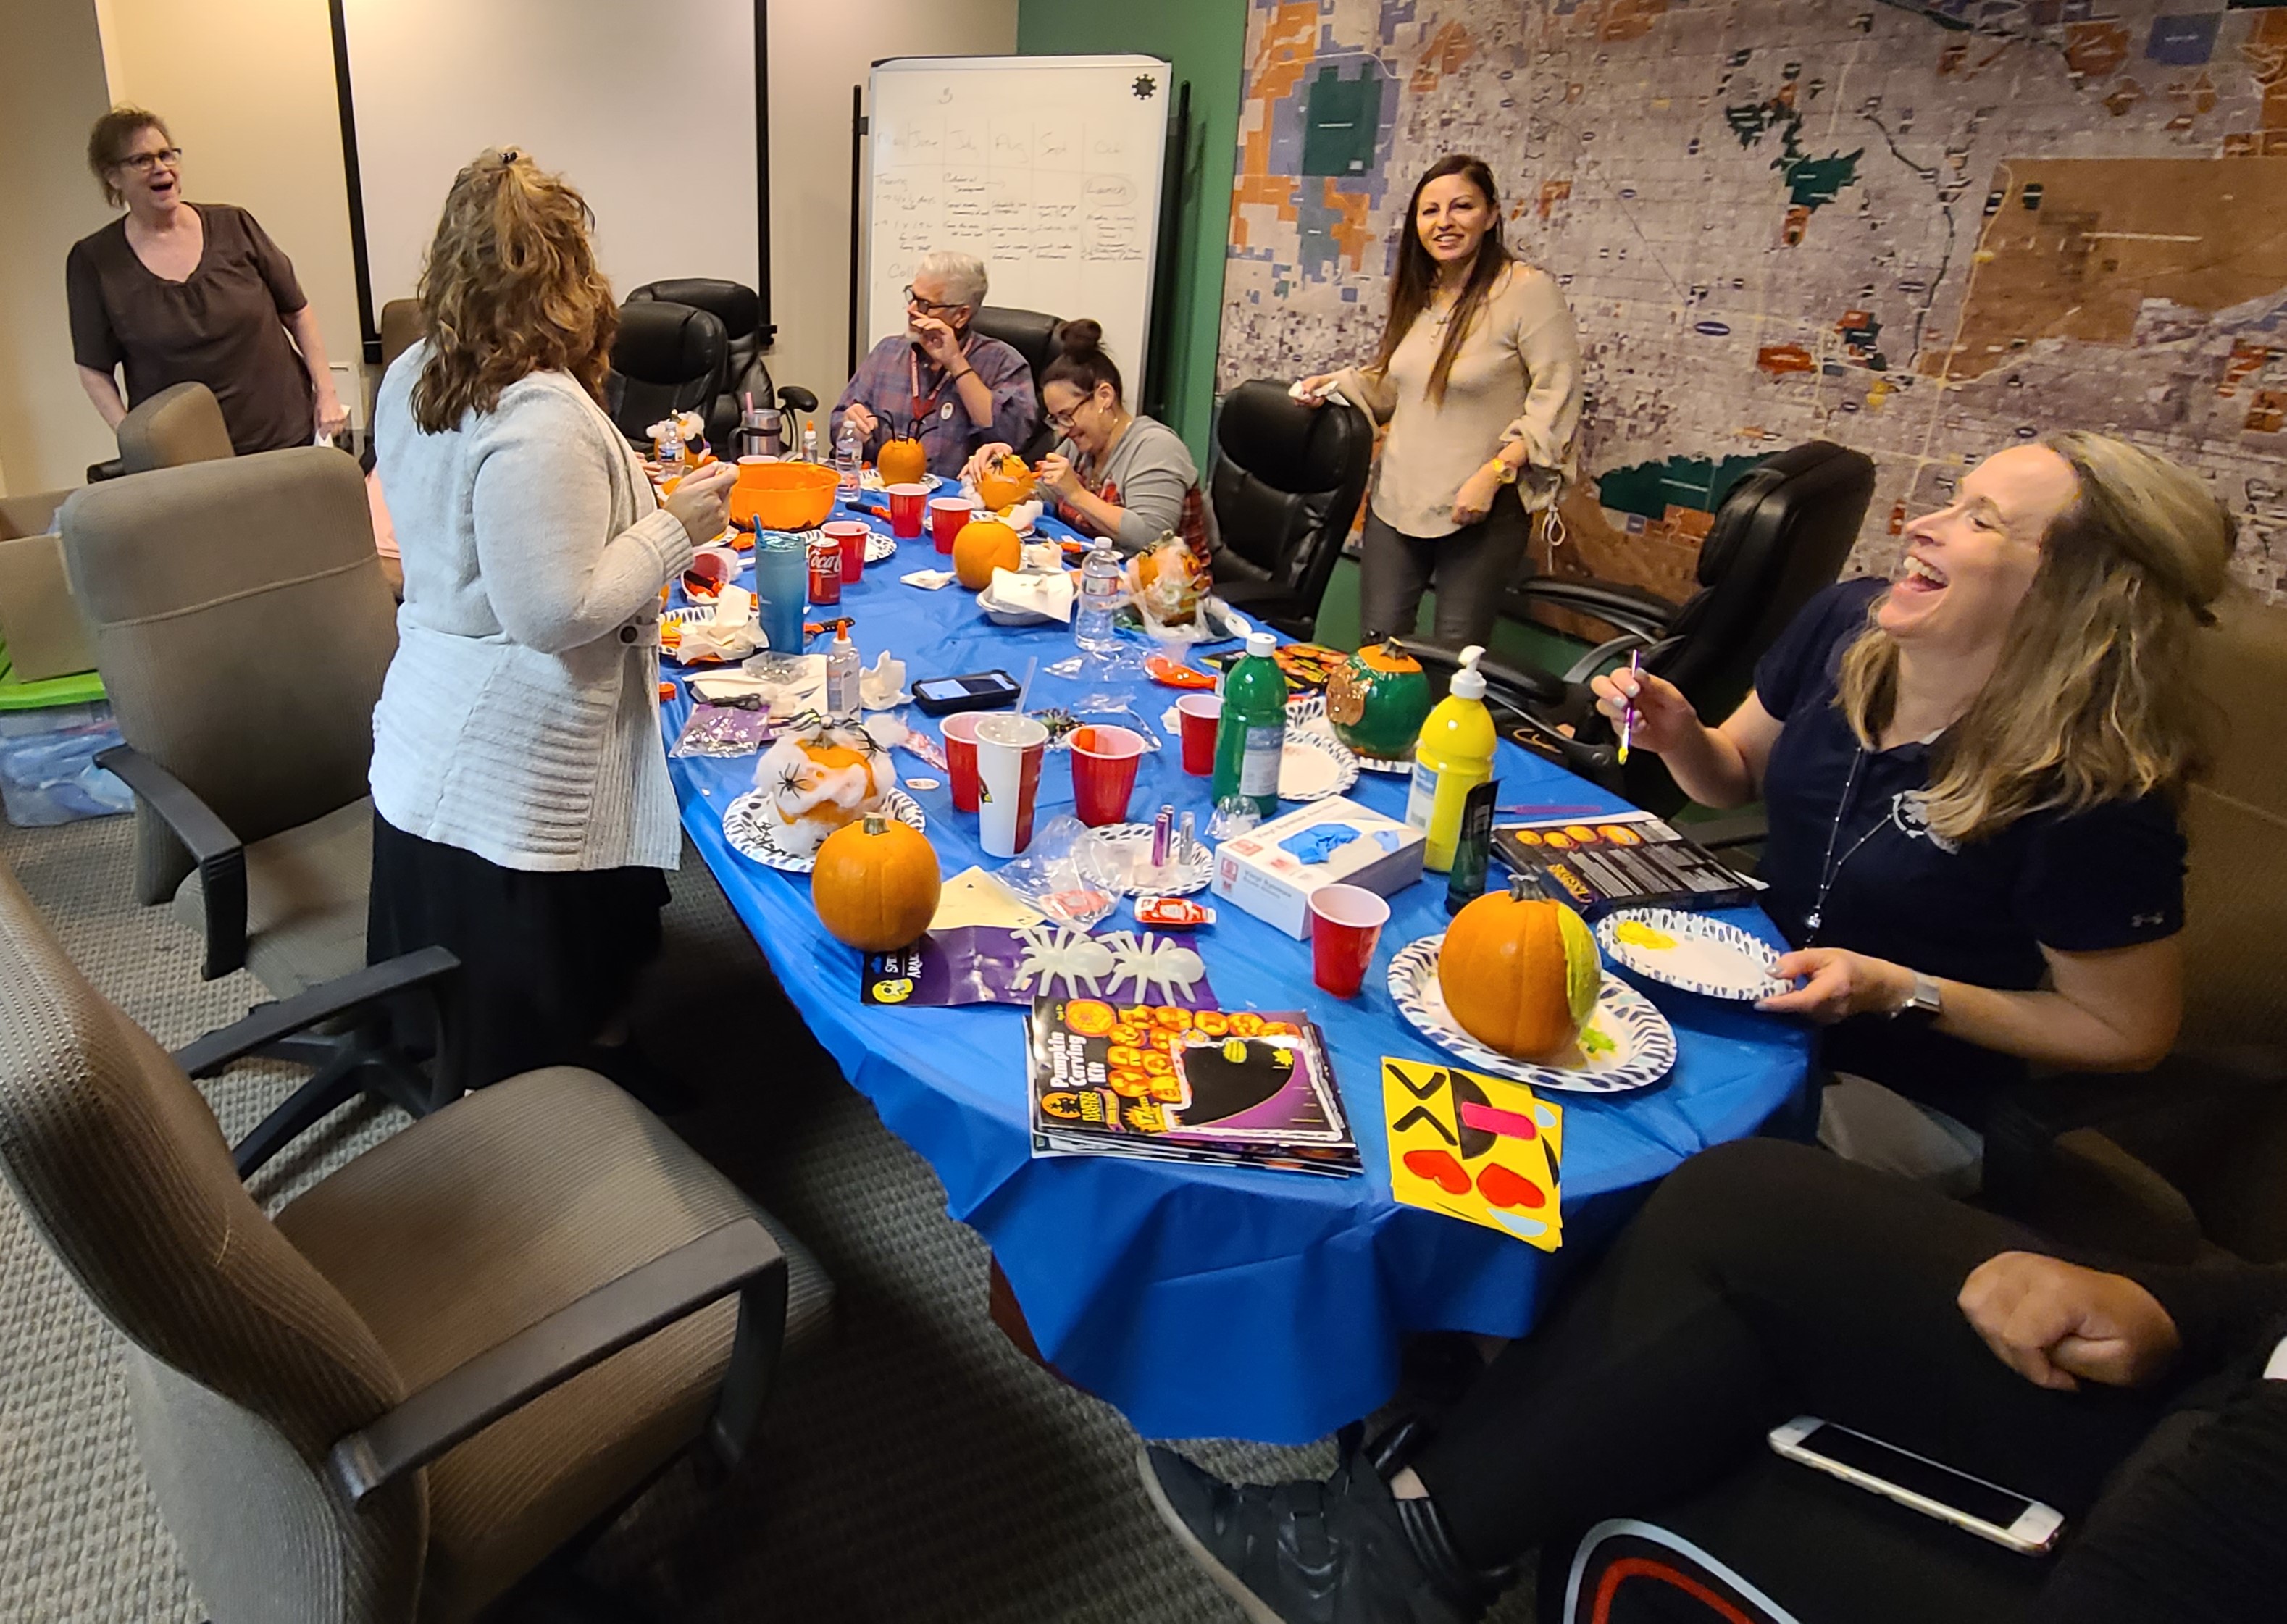 A group of people decorating pumpkins in an office setting